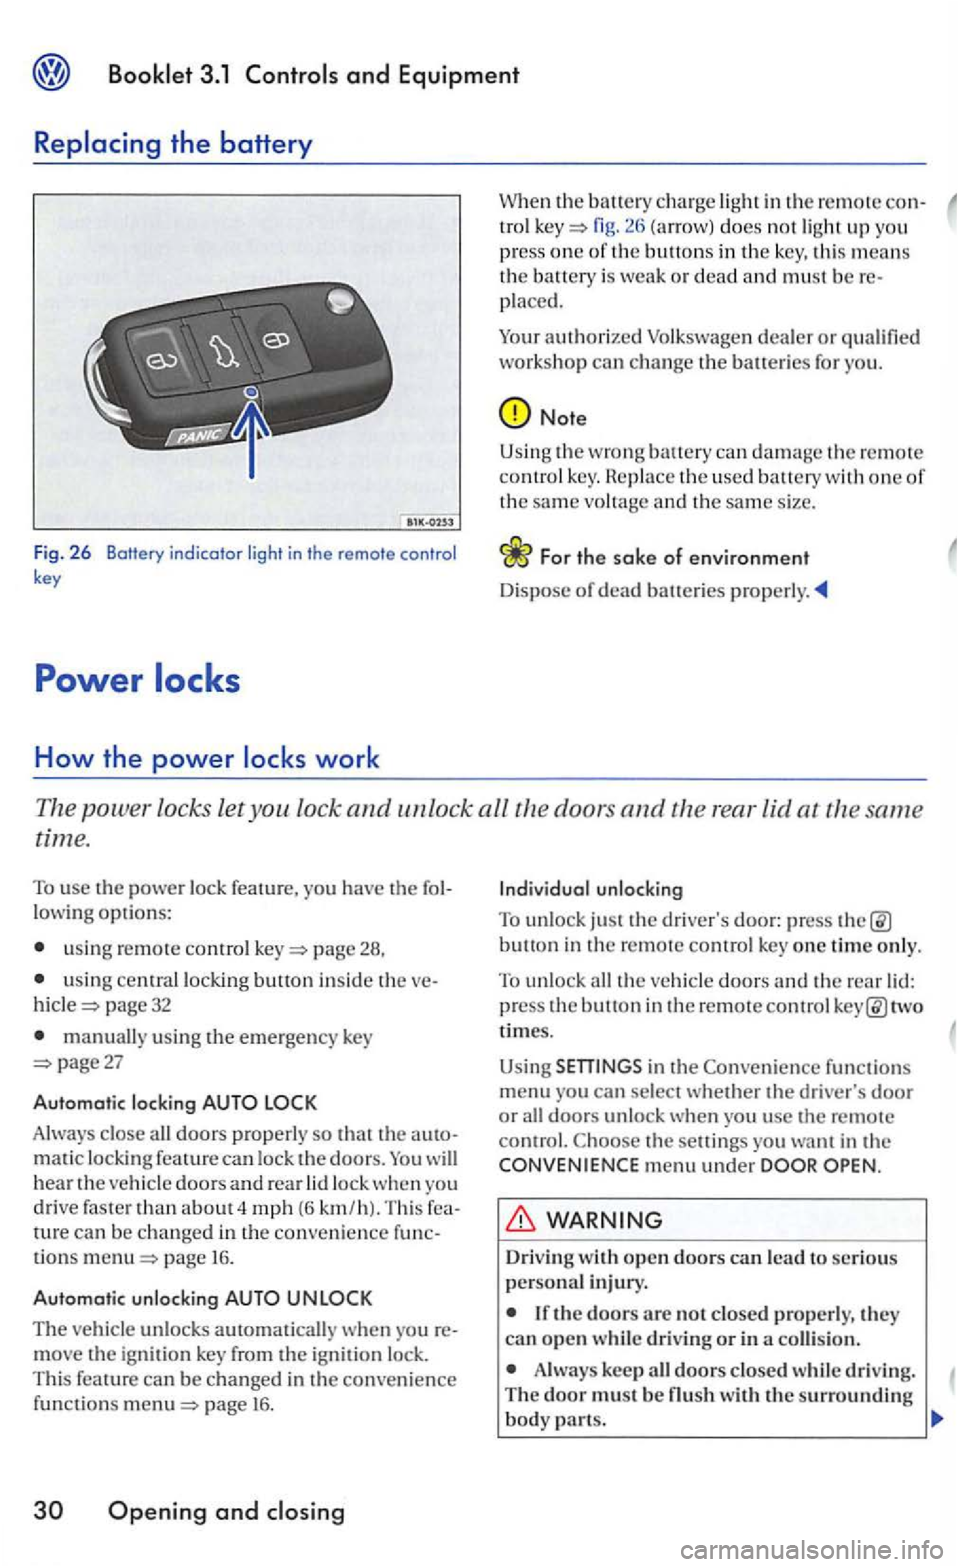 VOLKSWAGEN GOLF 2006  Owners Manual and Equipment 
Fig. 2 6  Botfery  indicator  light in the remote control key 
How the power 
in the remote con-tro l fig. does not ligh t up you 
press one of th e buttons in the key,  this means the 